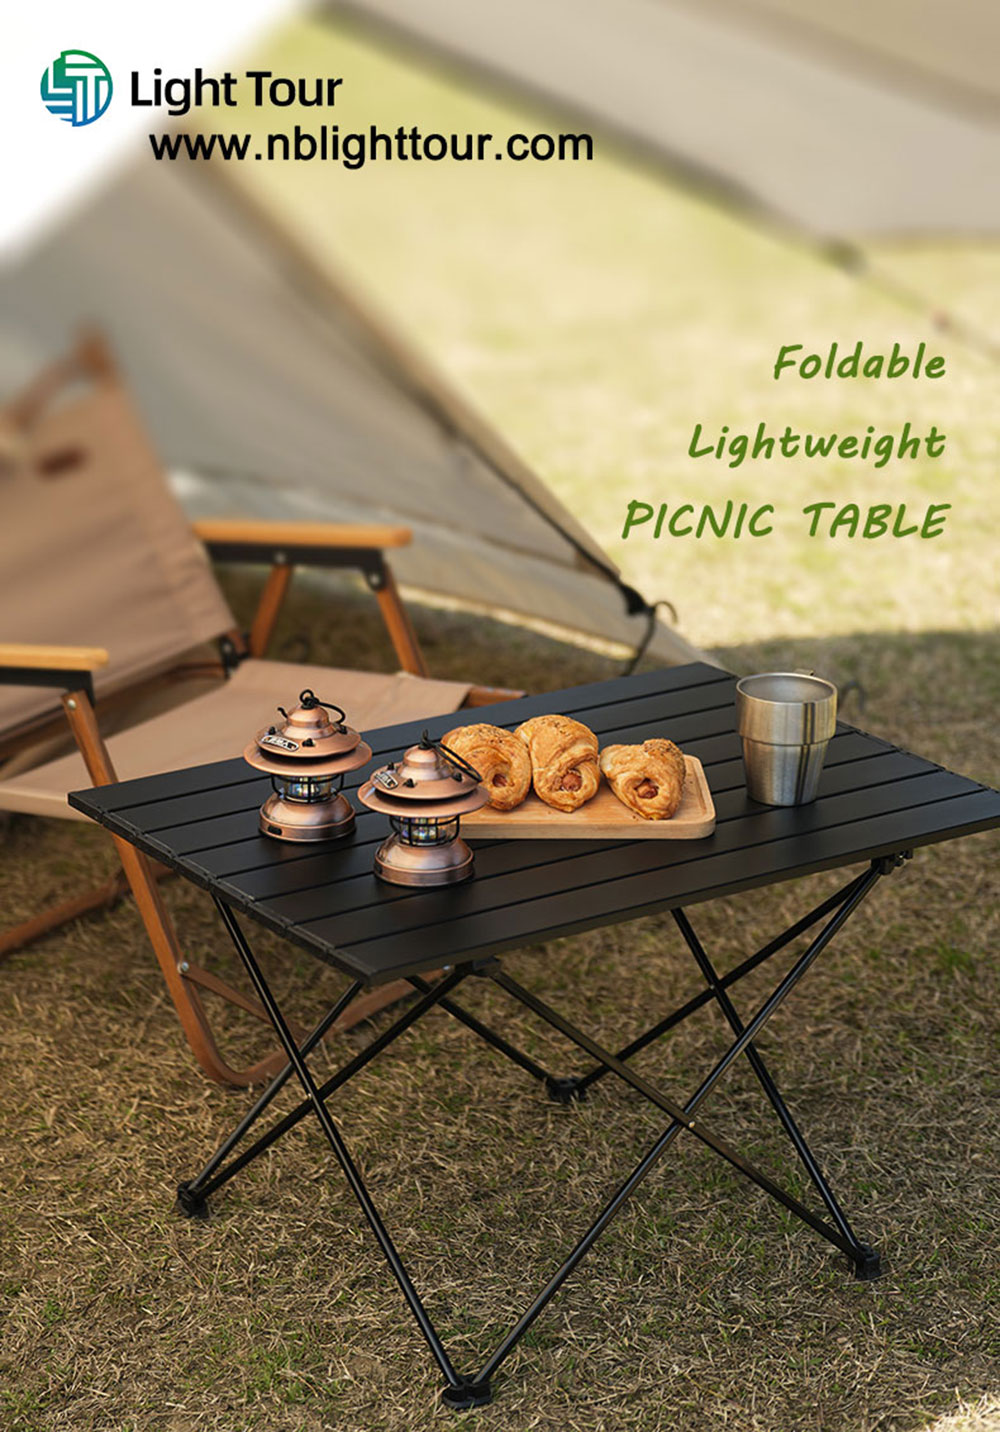 How can there be no table when having picnic?